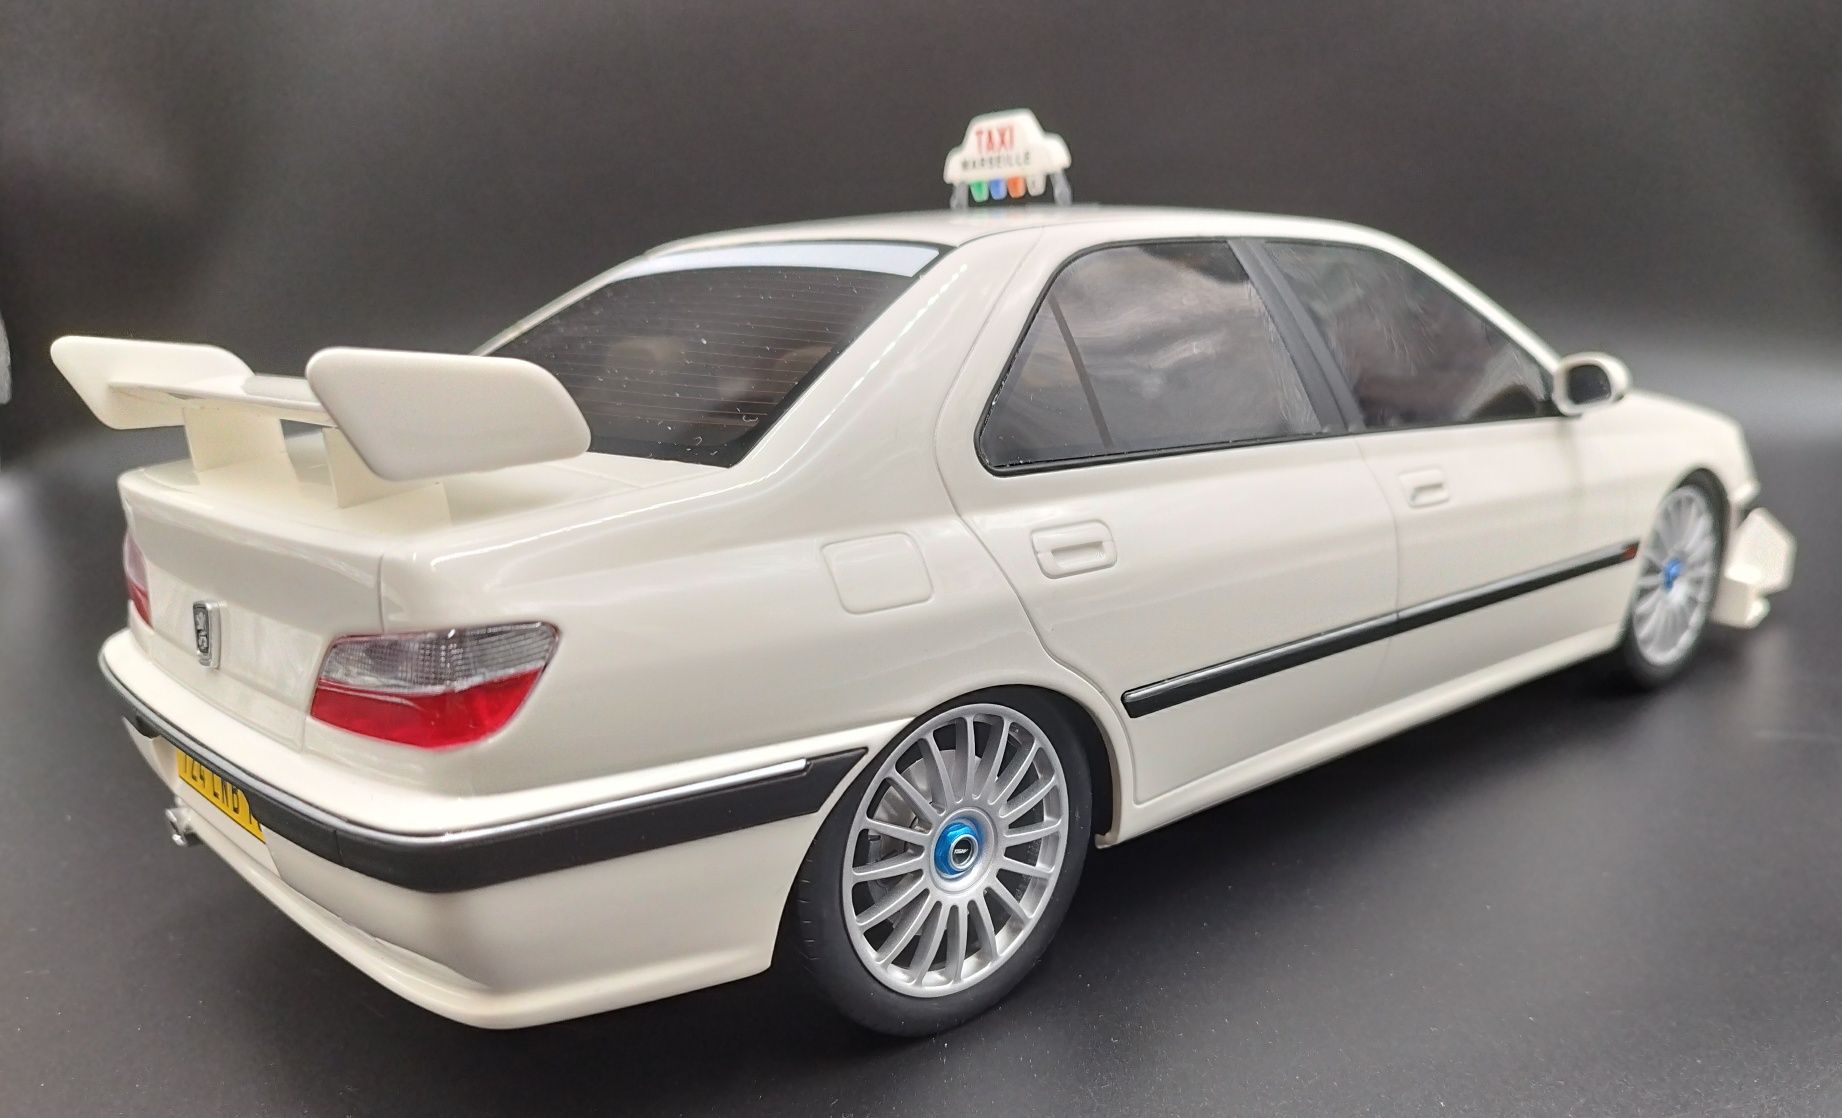 1:12 Otto G068 UVI Peugeot 406 TAXI model 1:12 nie 1:18 model nowy